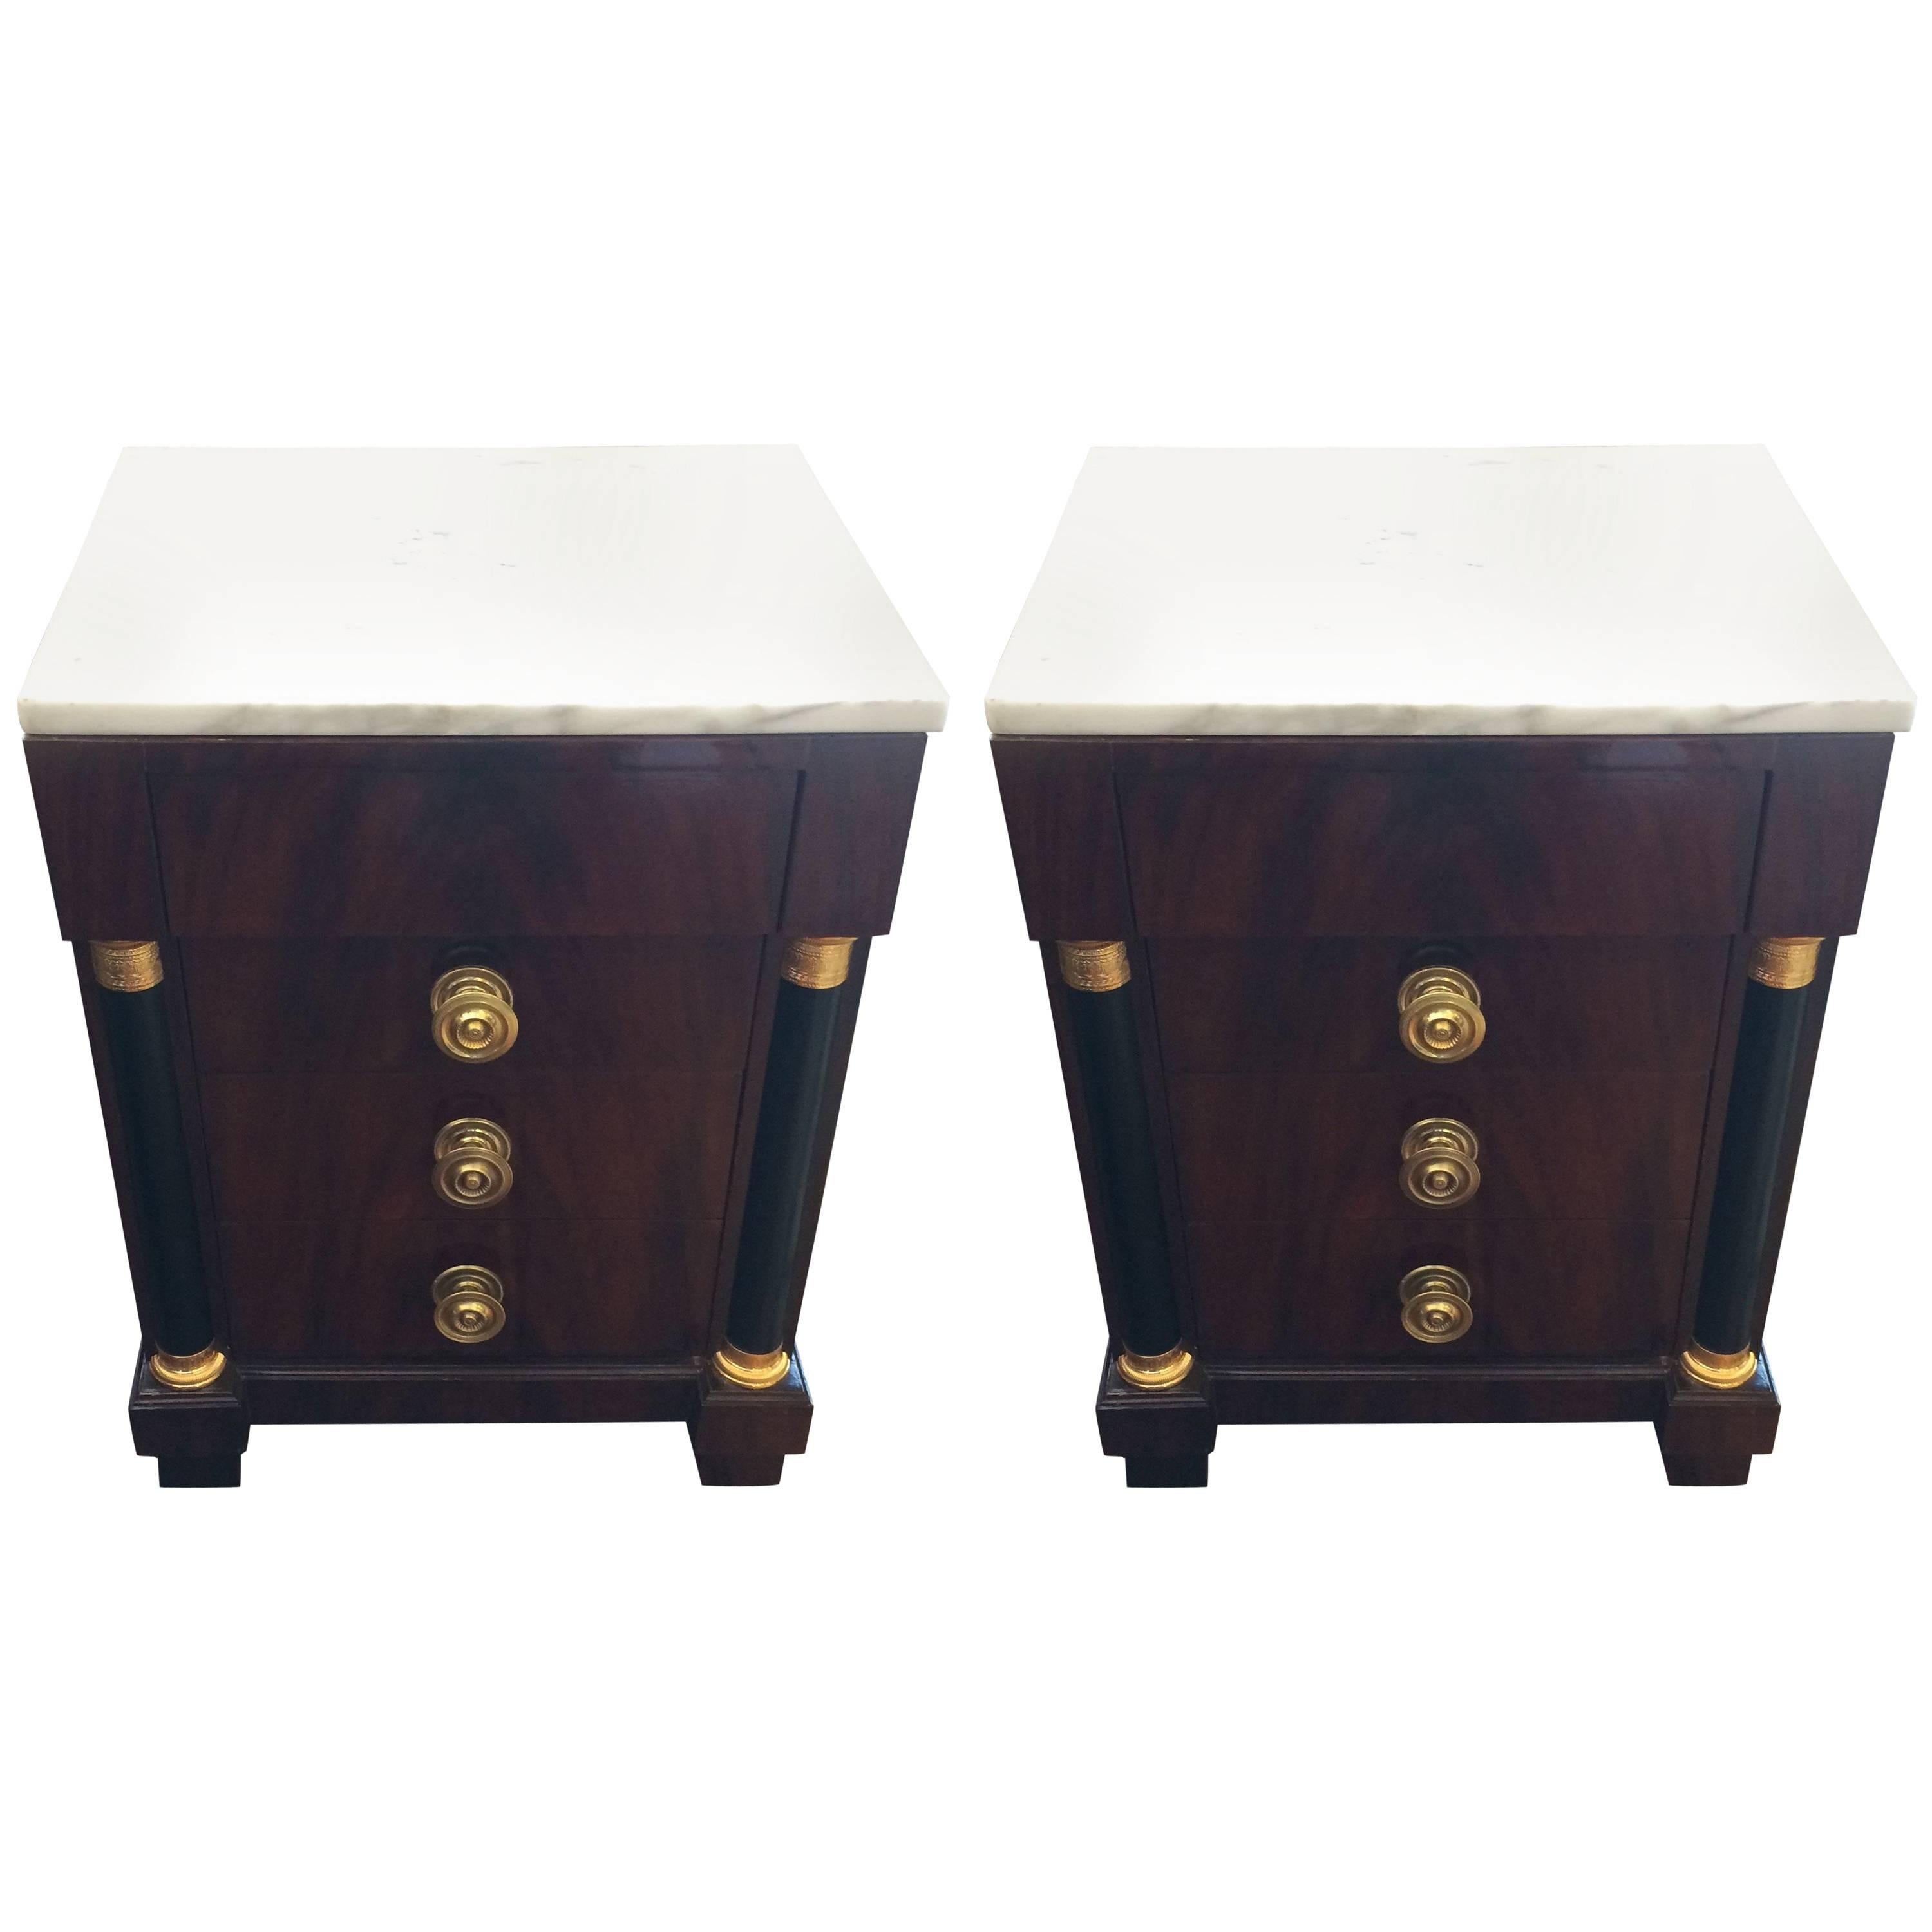 Neoclassical Style Italian Mahogany Marble Bachelor Chests or Nightstands, Pair